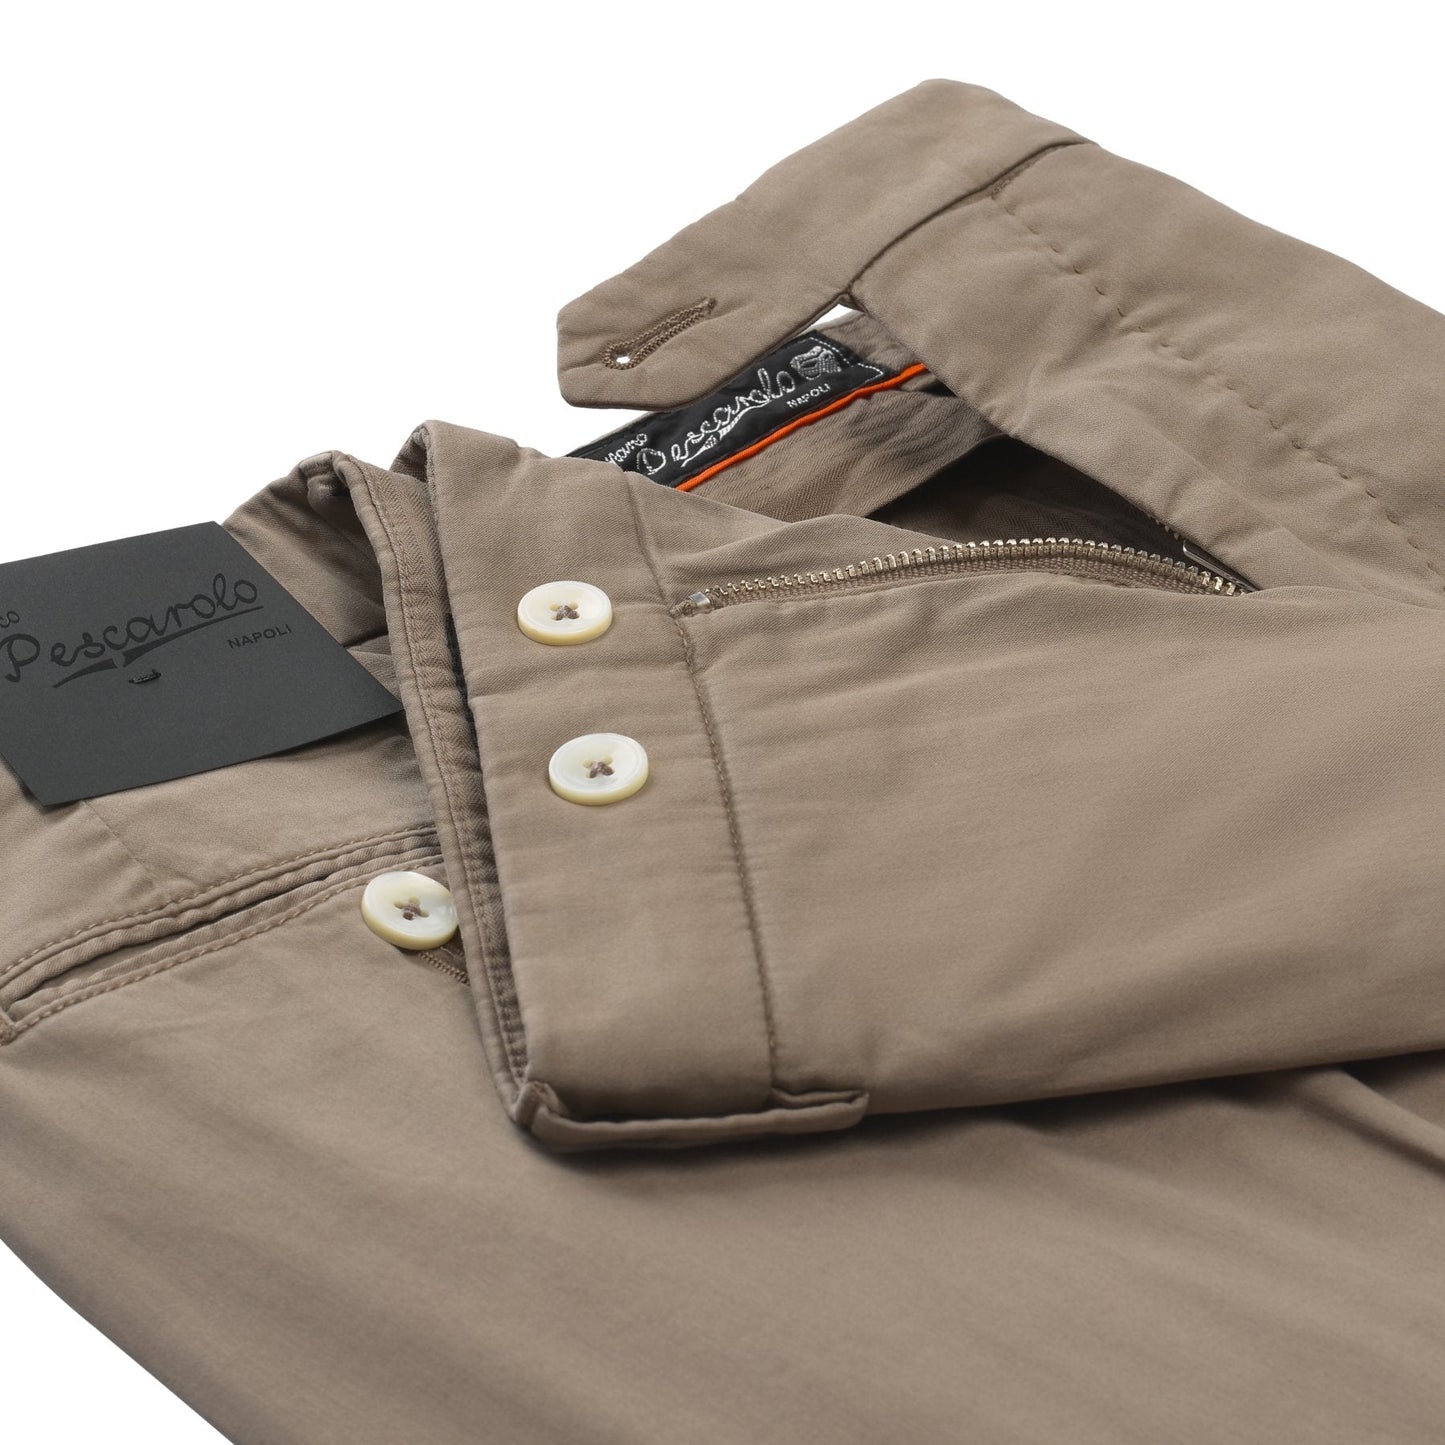 Marco Pescarolo Slim-Fit Cotton-Blend Trousers in Light Brown - SARTALE